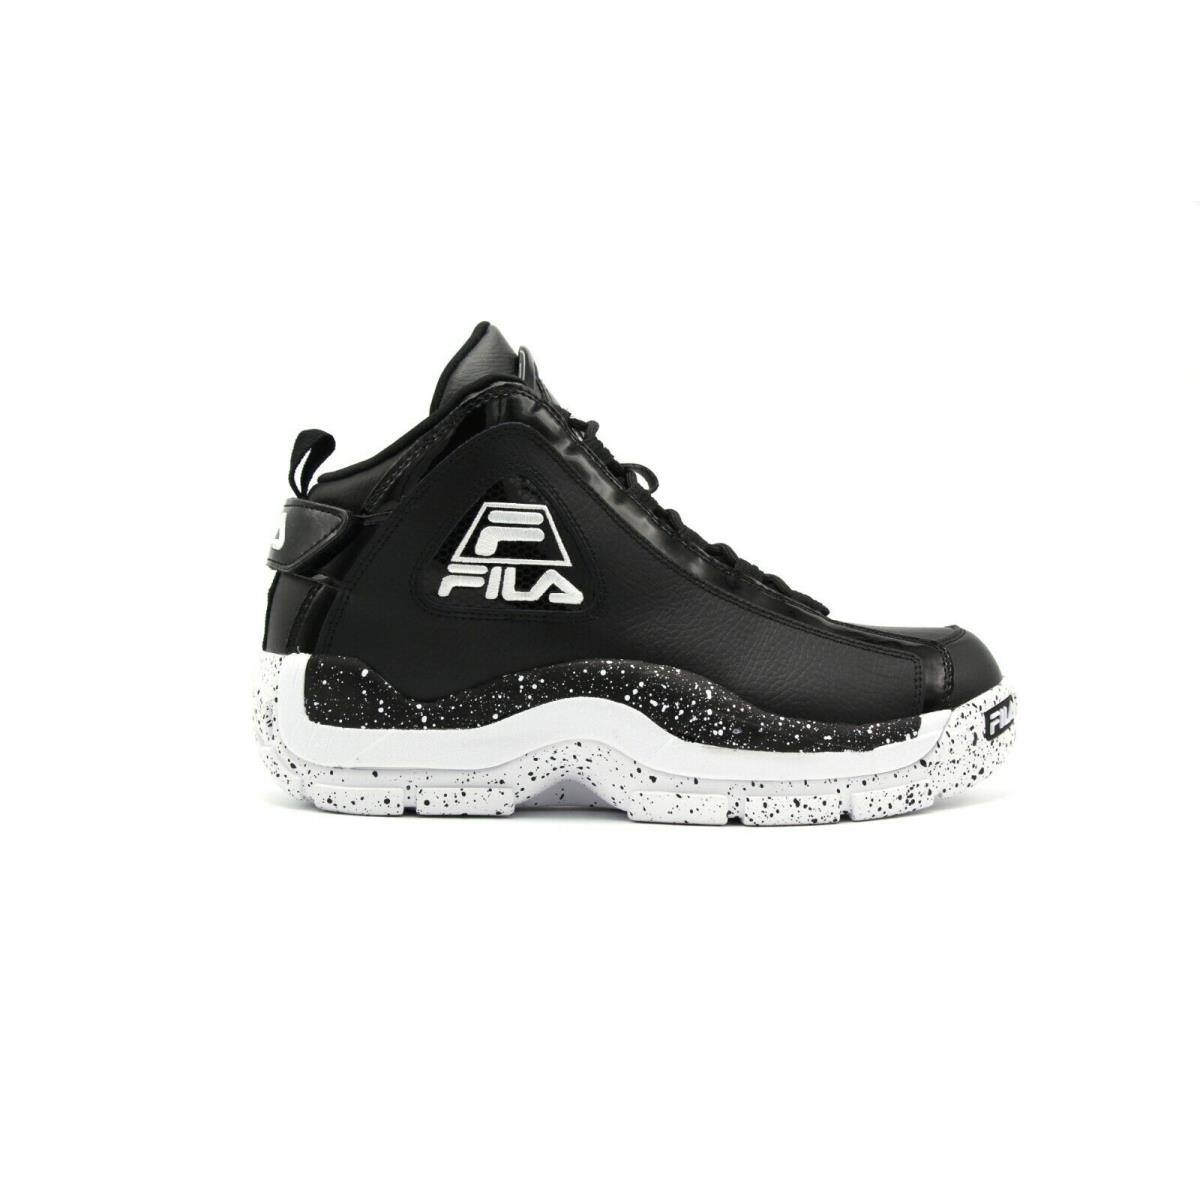 Power important Couple Mens Fila 96 Grant Hill Black 2PAC Retro Limited Edition High Top Sneakers  | 054475564840 - Fila shoes - Black | SporTipTop